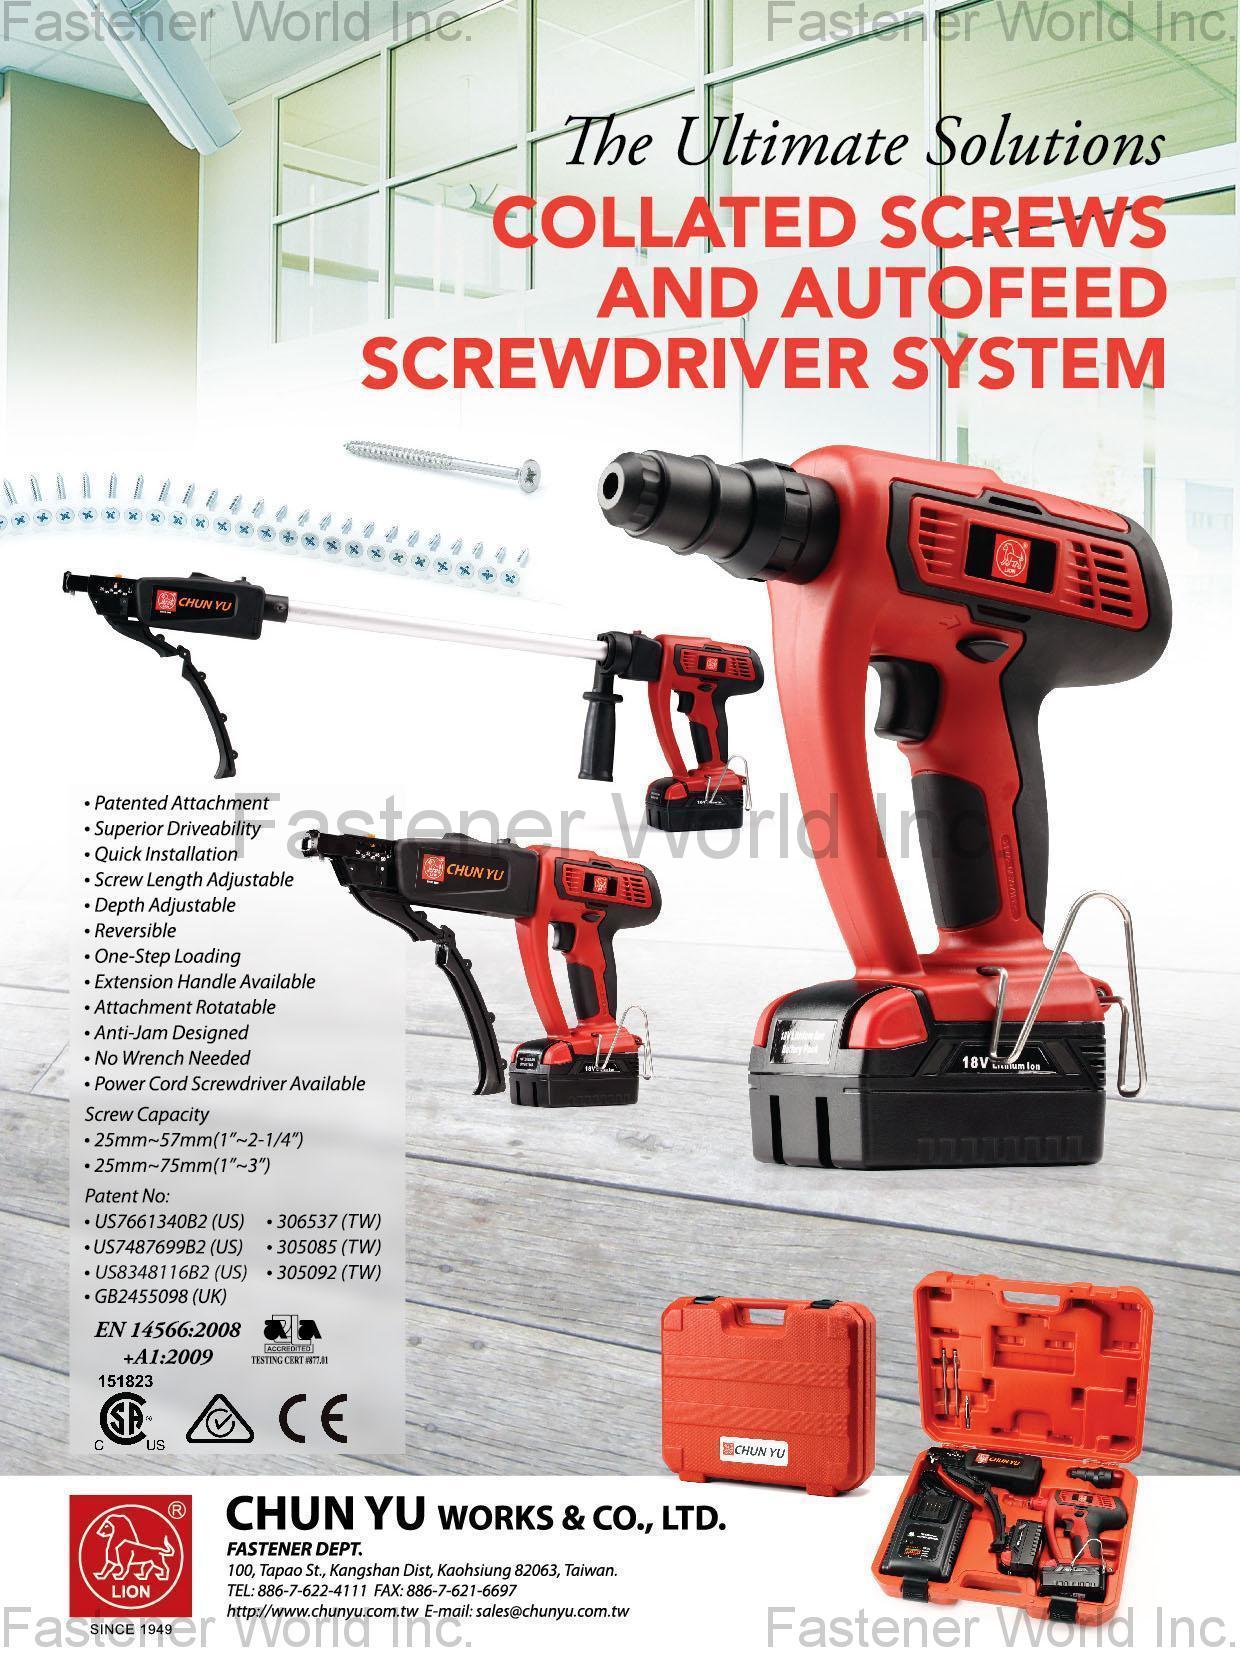 CHUN YU WORKS ＆ CO., LTD.  , Collated Screw and Autofeed Screwdriver System , Collated Screws